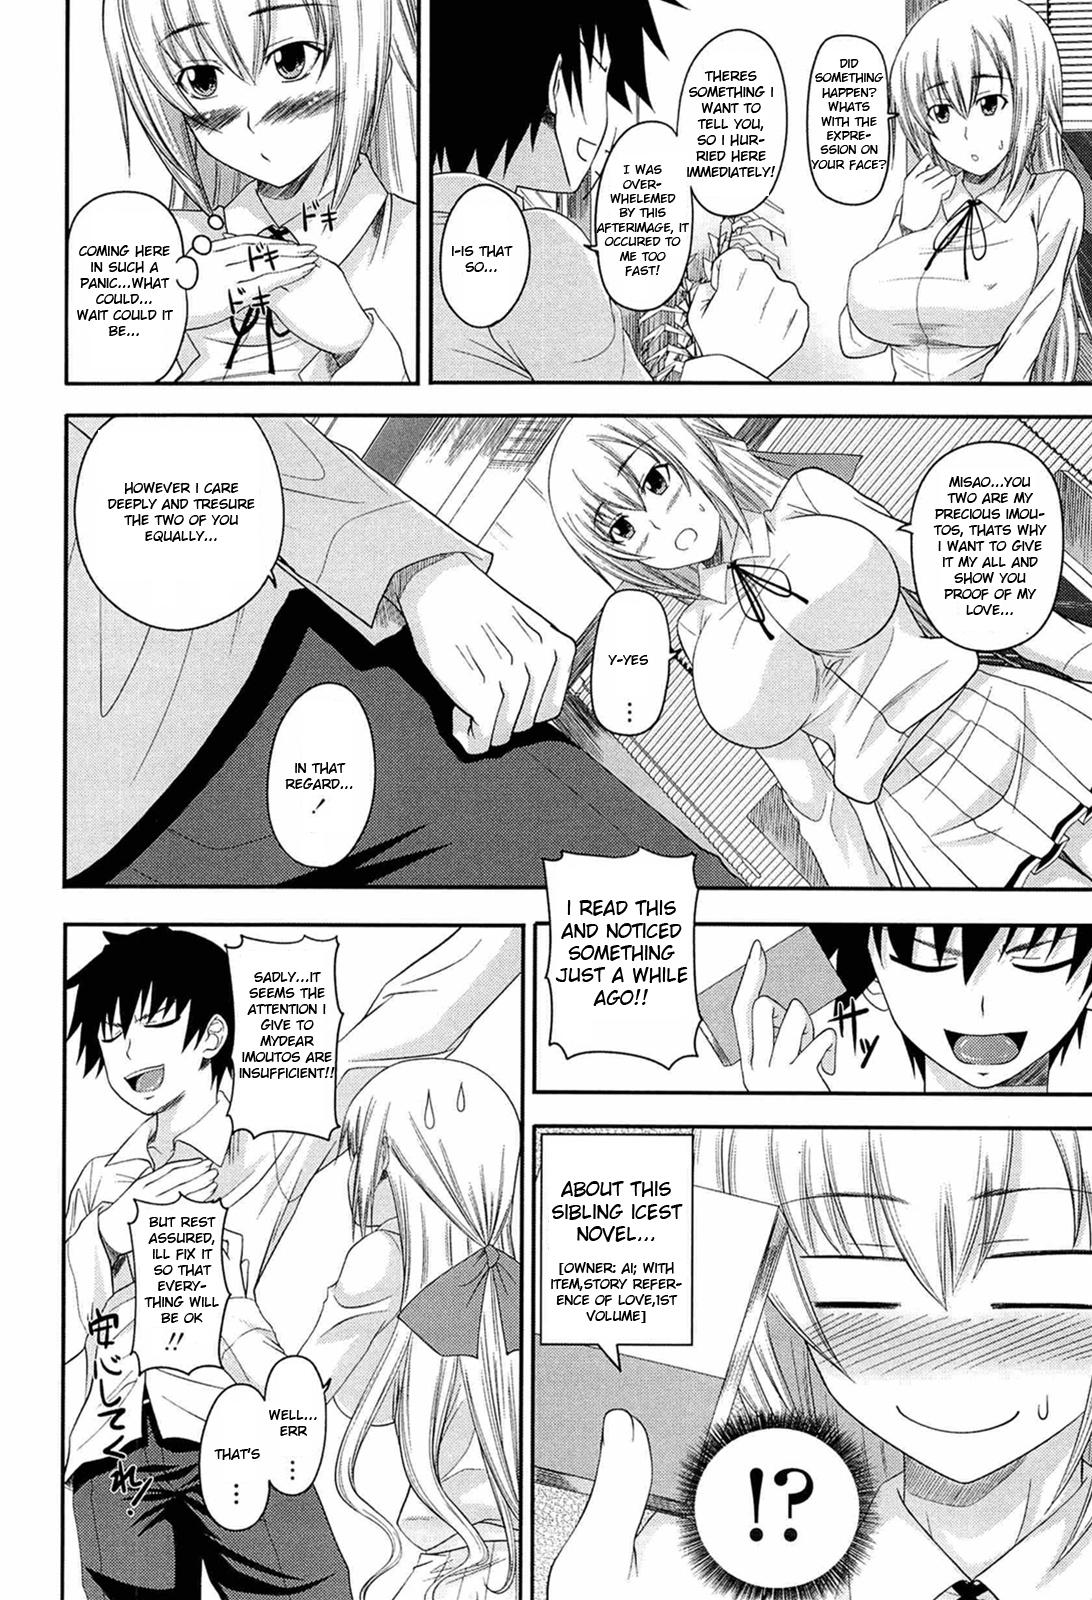 Women Sucking Dicks I, My, Me, Mine Ch. 2 Outdoor - Page 4